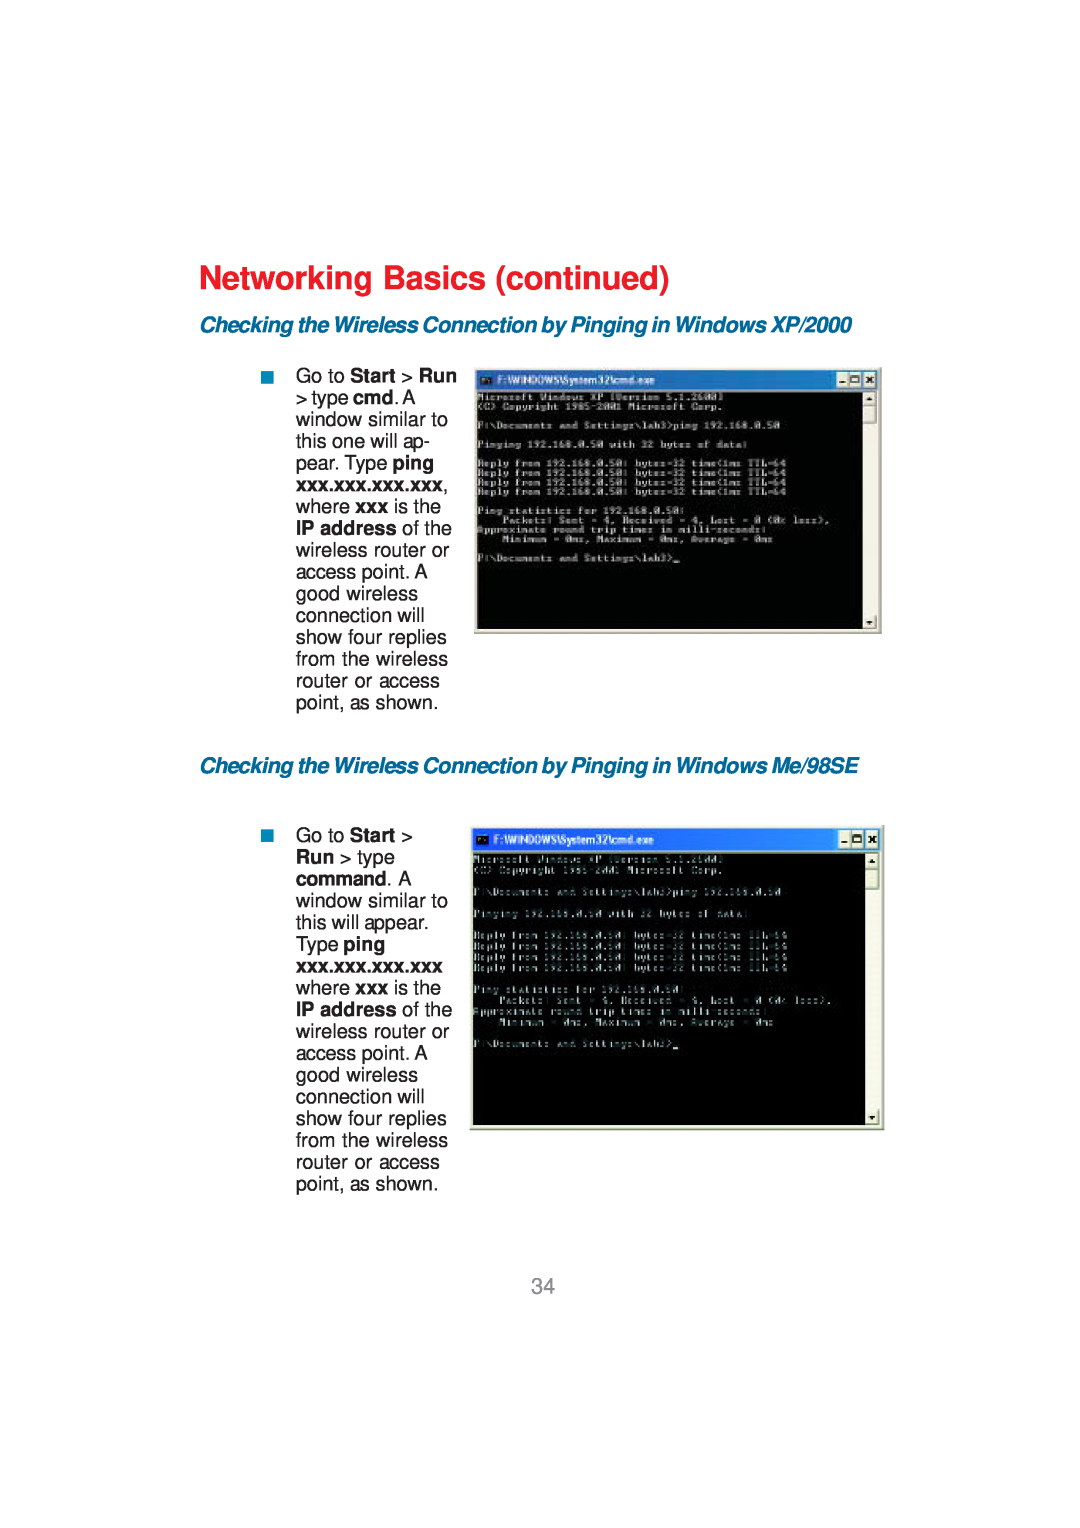 D-Link DWL-AG530 manual Checking the Wireless Connection by Pinging in Windows XP/2000, Networking Basics continued 